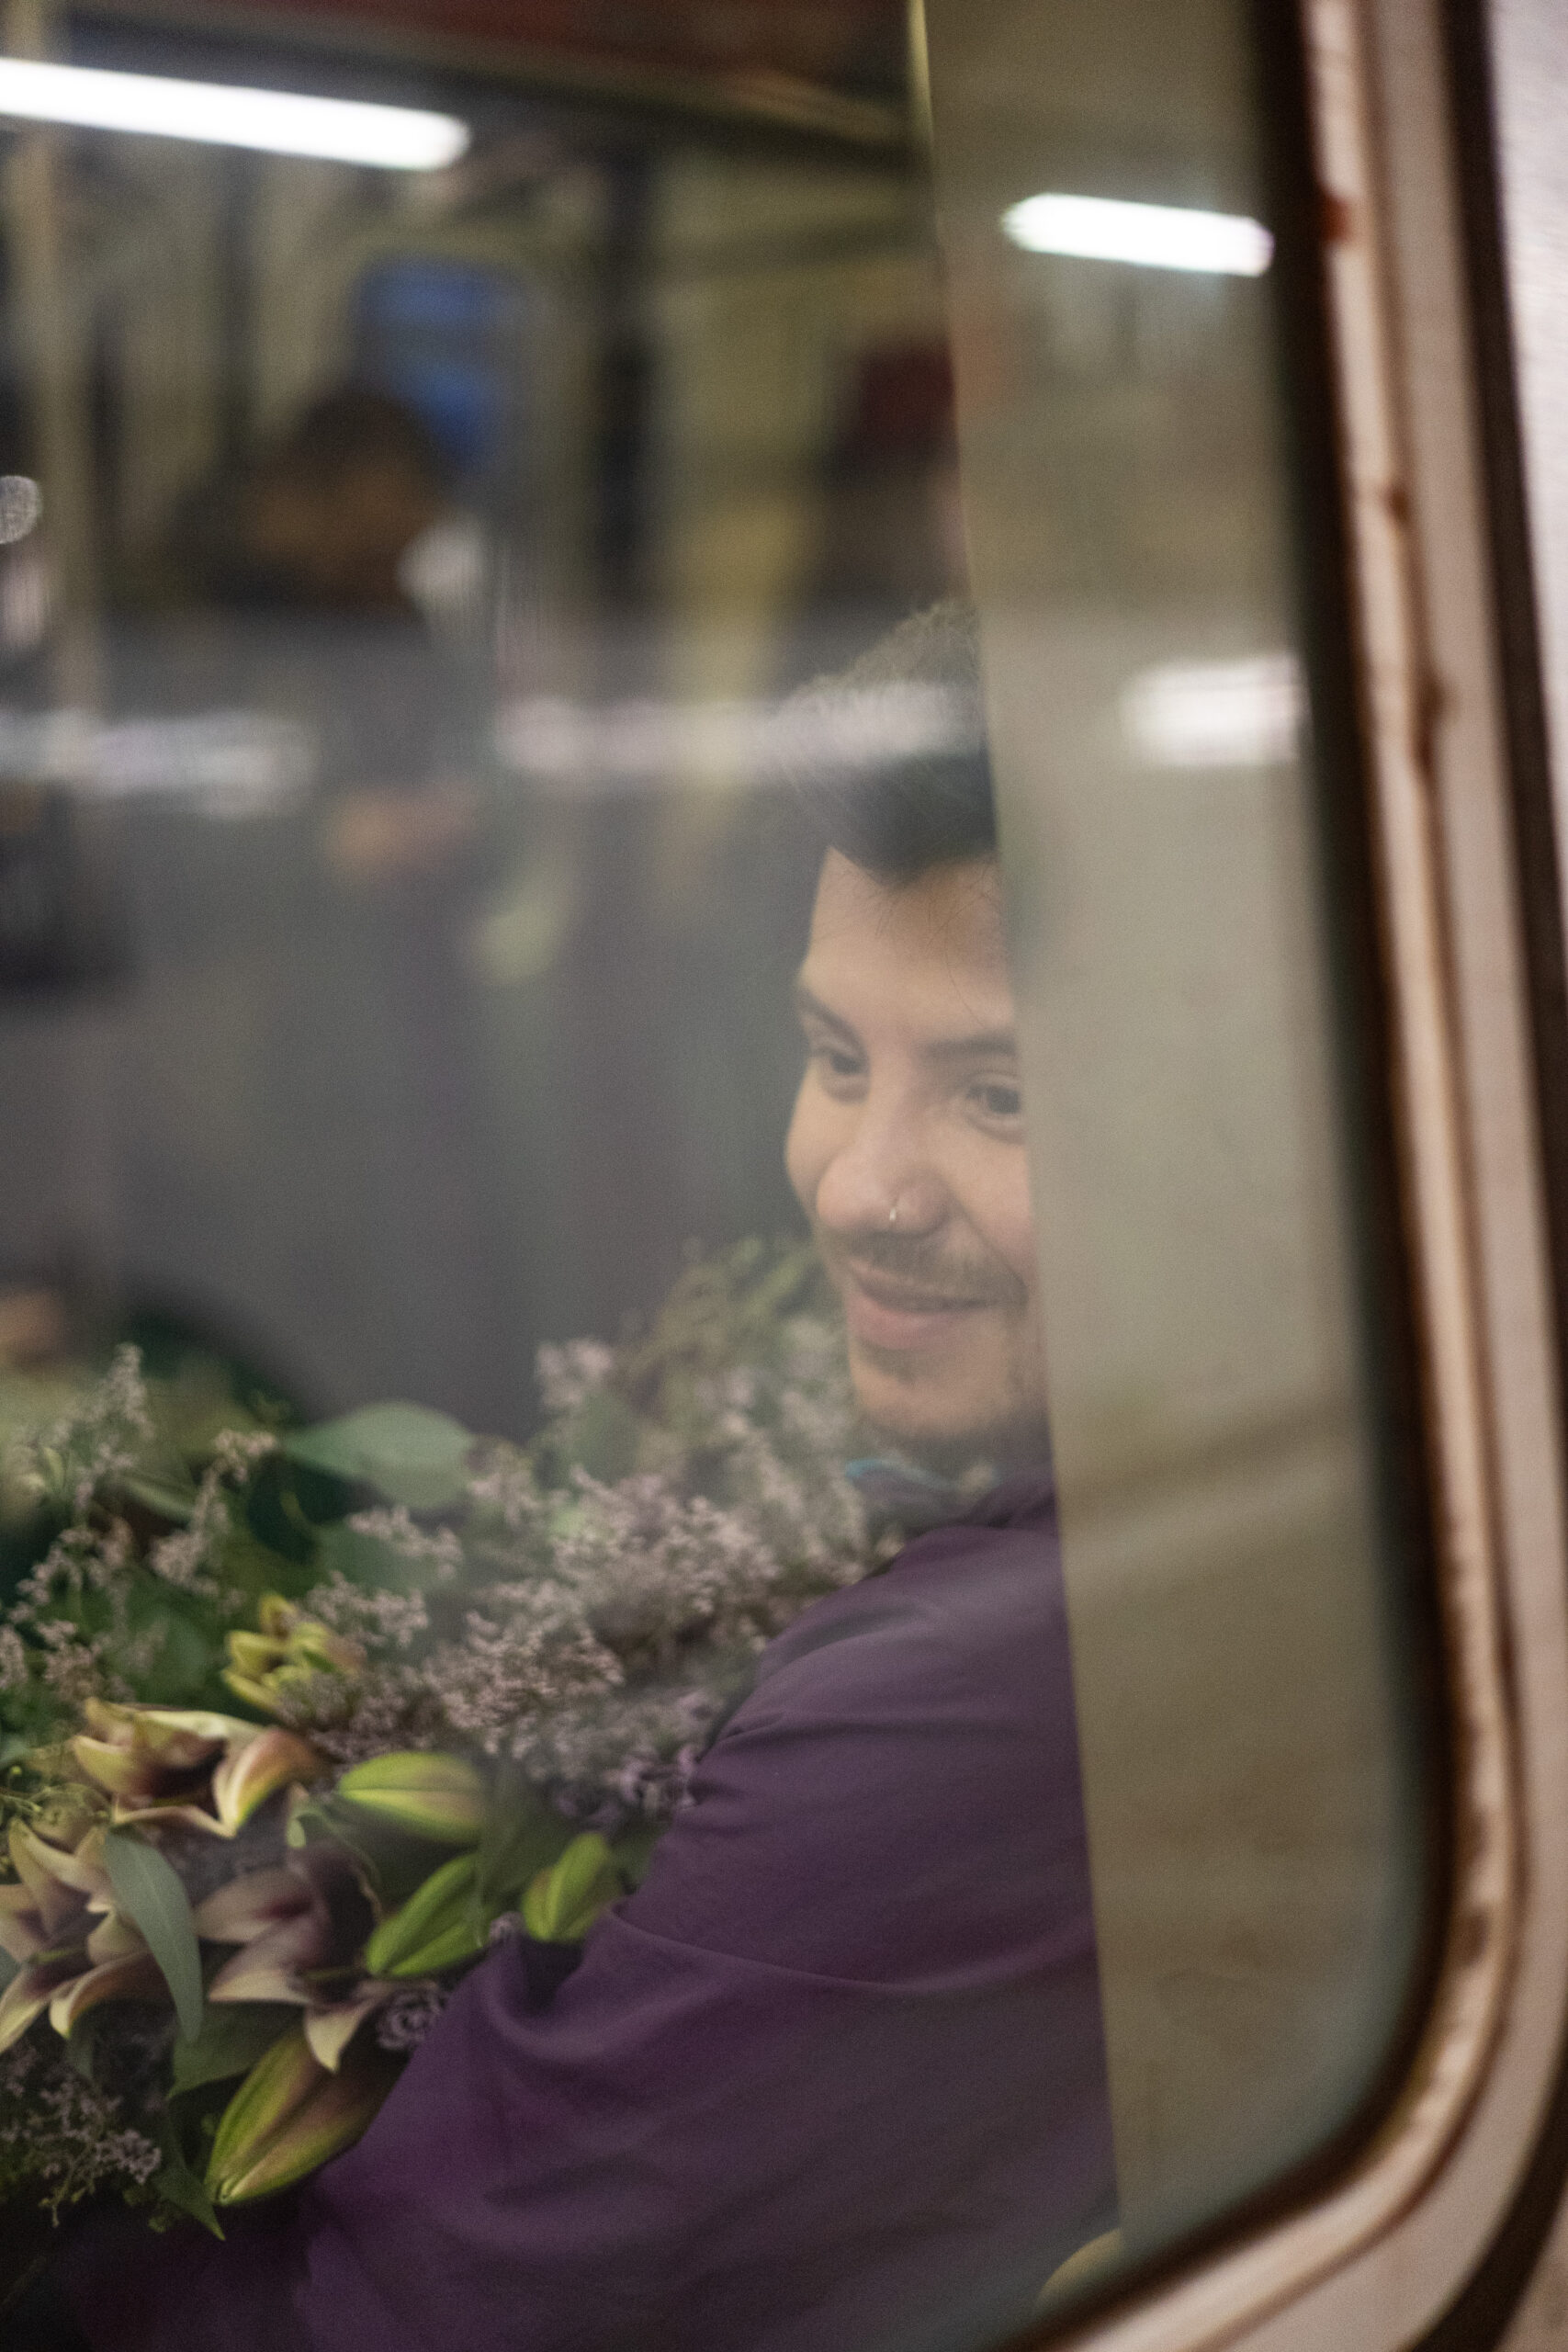  A man holding a large bouquet of lilies sits with his back towards a subway window. He looks at something out of frame with a look of quiet contentment. Only part of his face can be seen. He is wearing a warm purple dress shirt which is of a similar color to the flowers in his arms. The smudged reflections of people in the subway are distorted by stripes of light cast by the luminescent lights above. A stroke of metal frames the image.